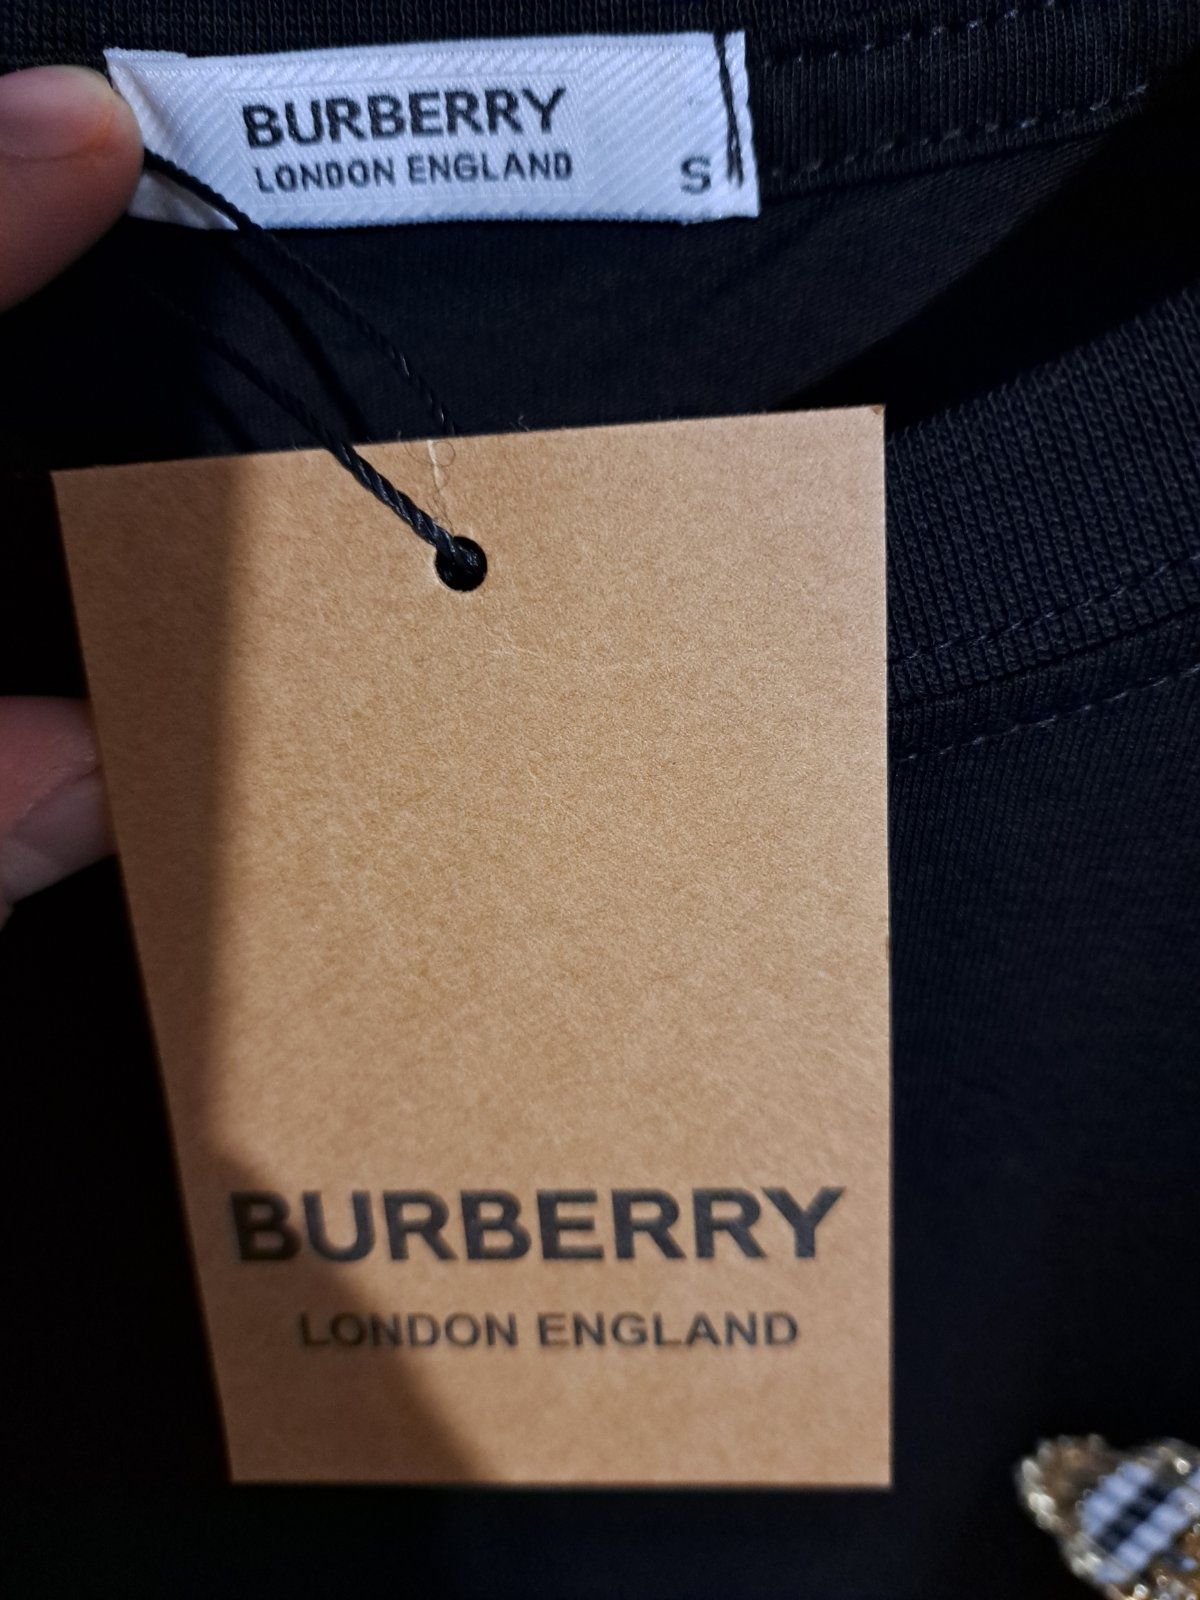 *BURBERY* New products*